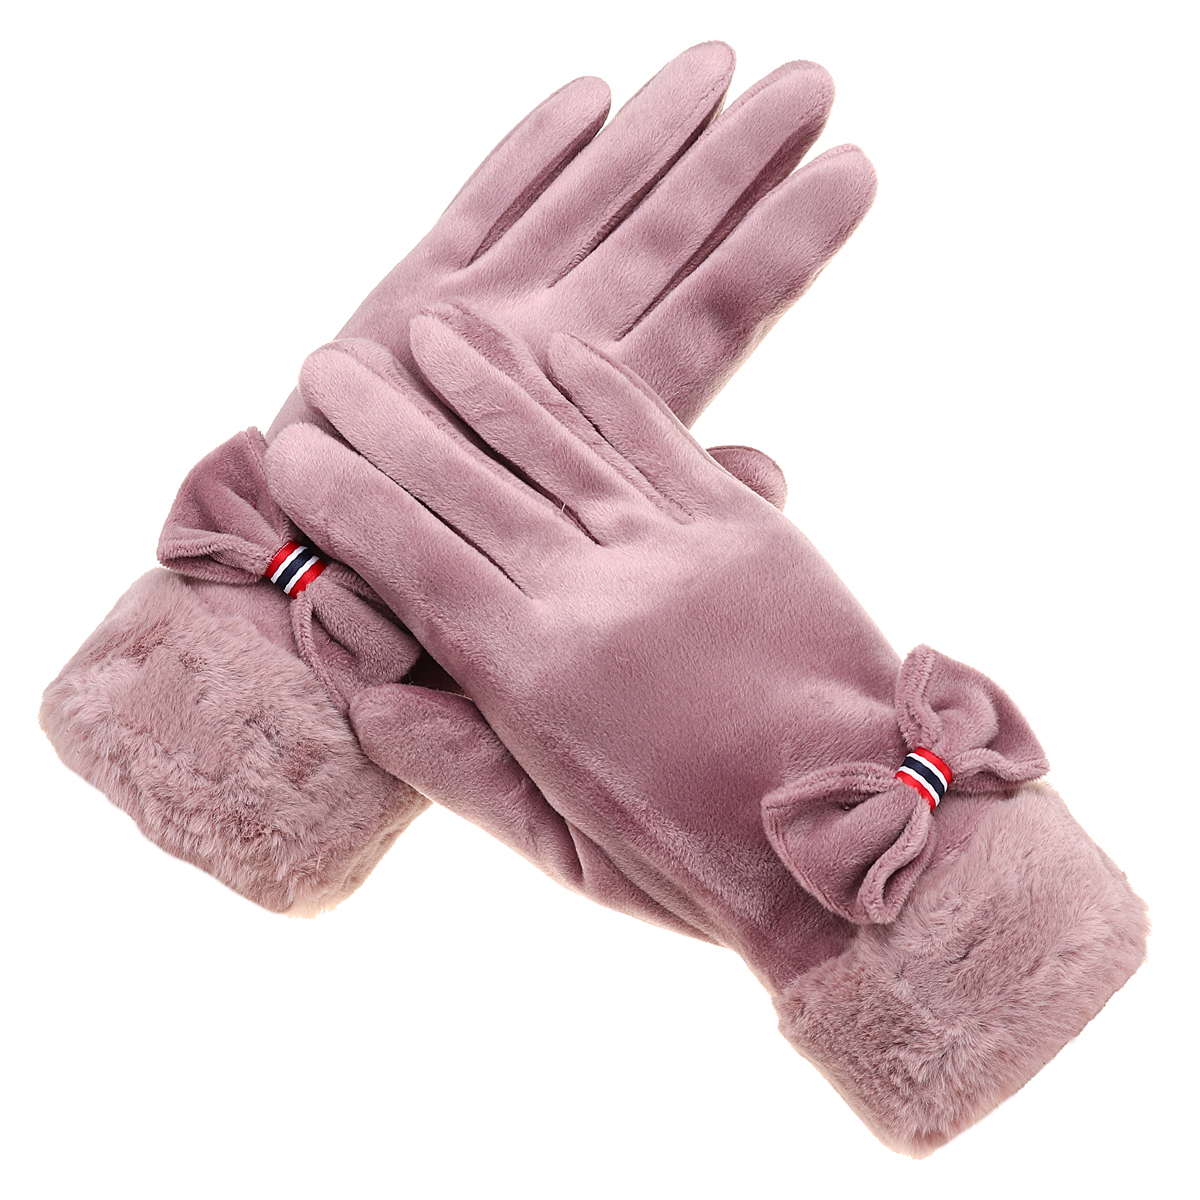 

Winter Warm Gloves Touch Screen Windproof Riding Skiing Outdoor Sports Gloves